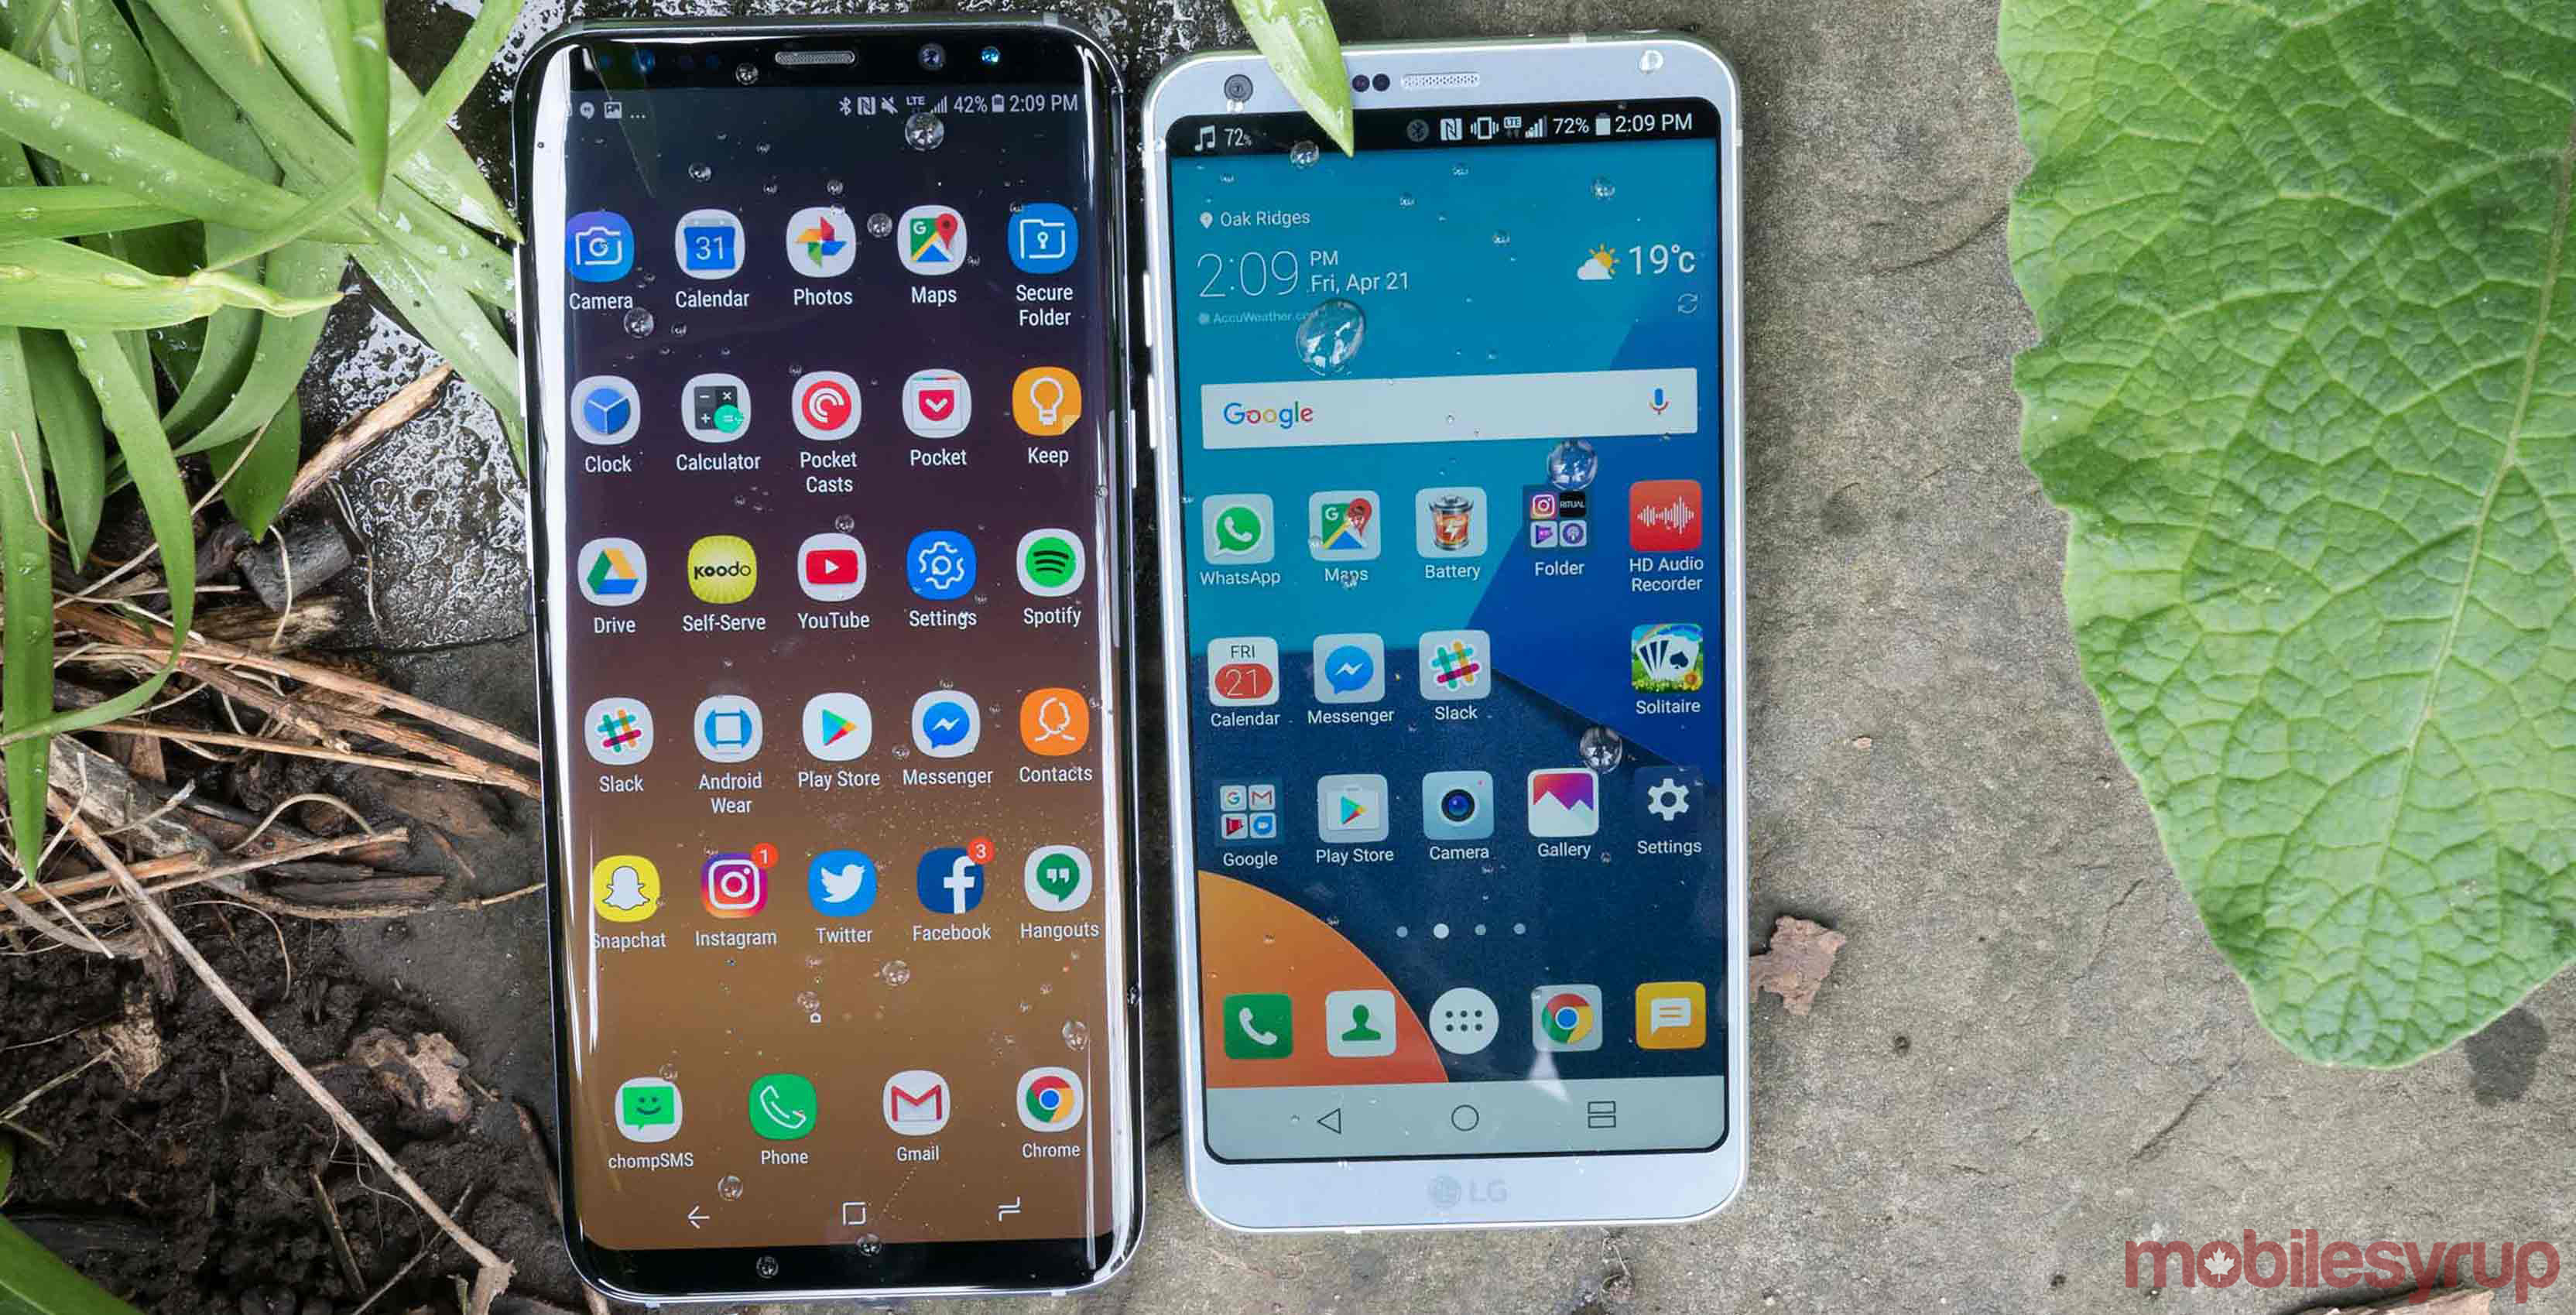 LG G6 and S8